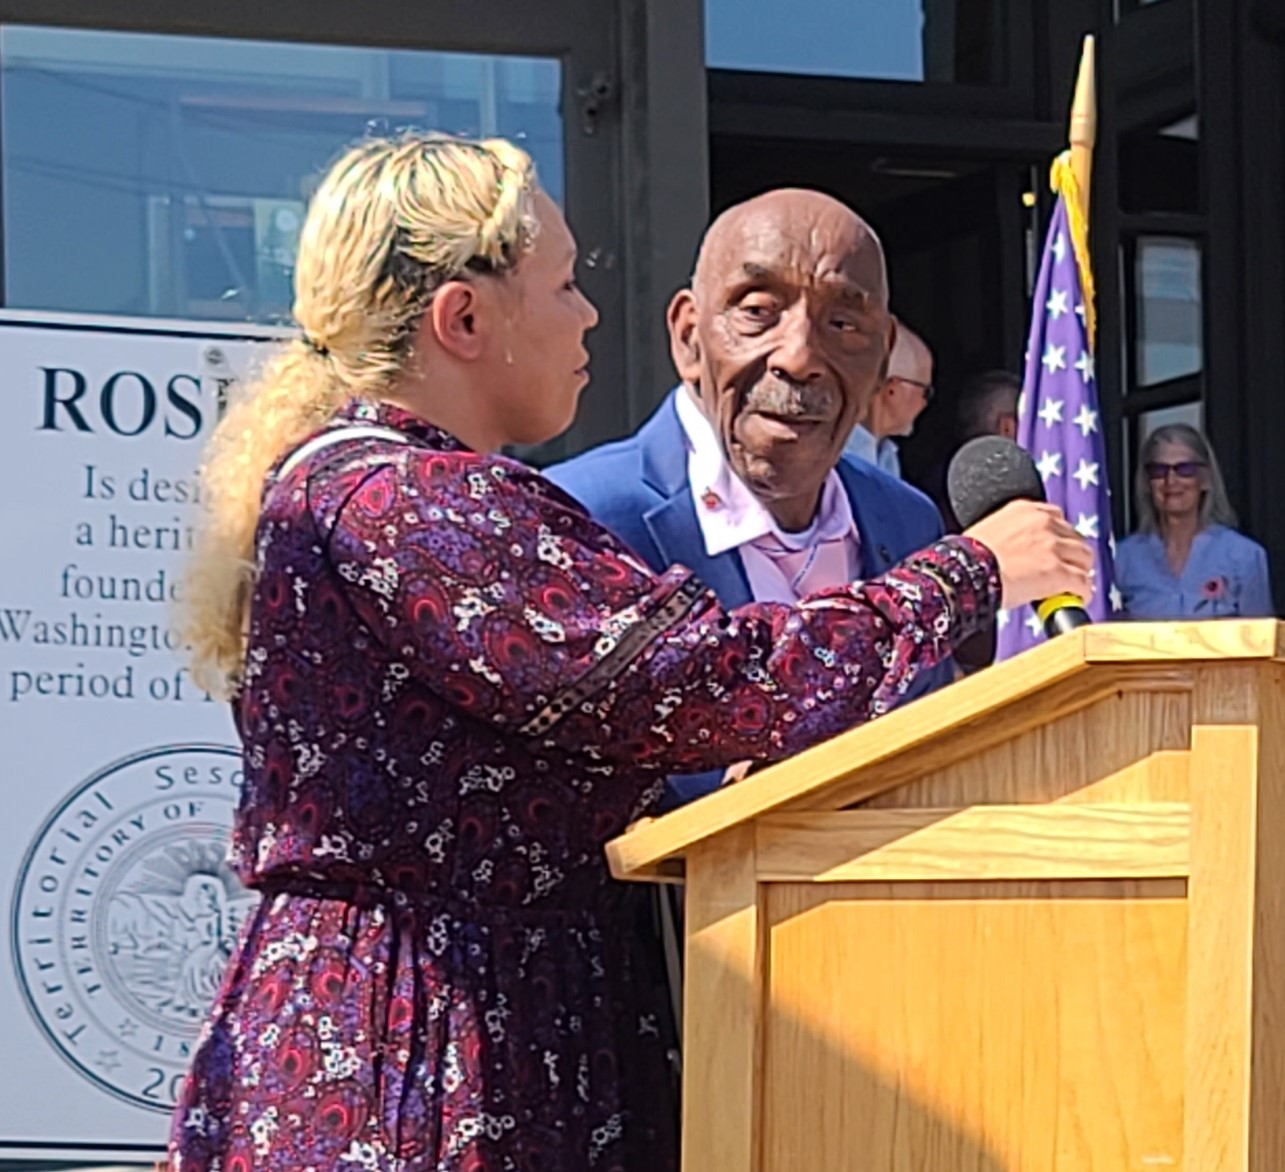 Mayor William Craven Speaking (with Daughter Assisting) Roslyn, Washington, August 7, 2021 (Jamila Taylor Collecetion)